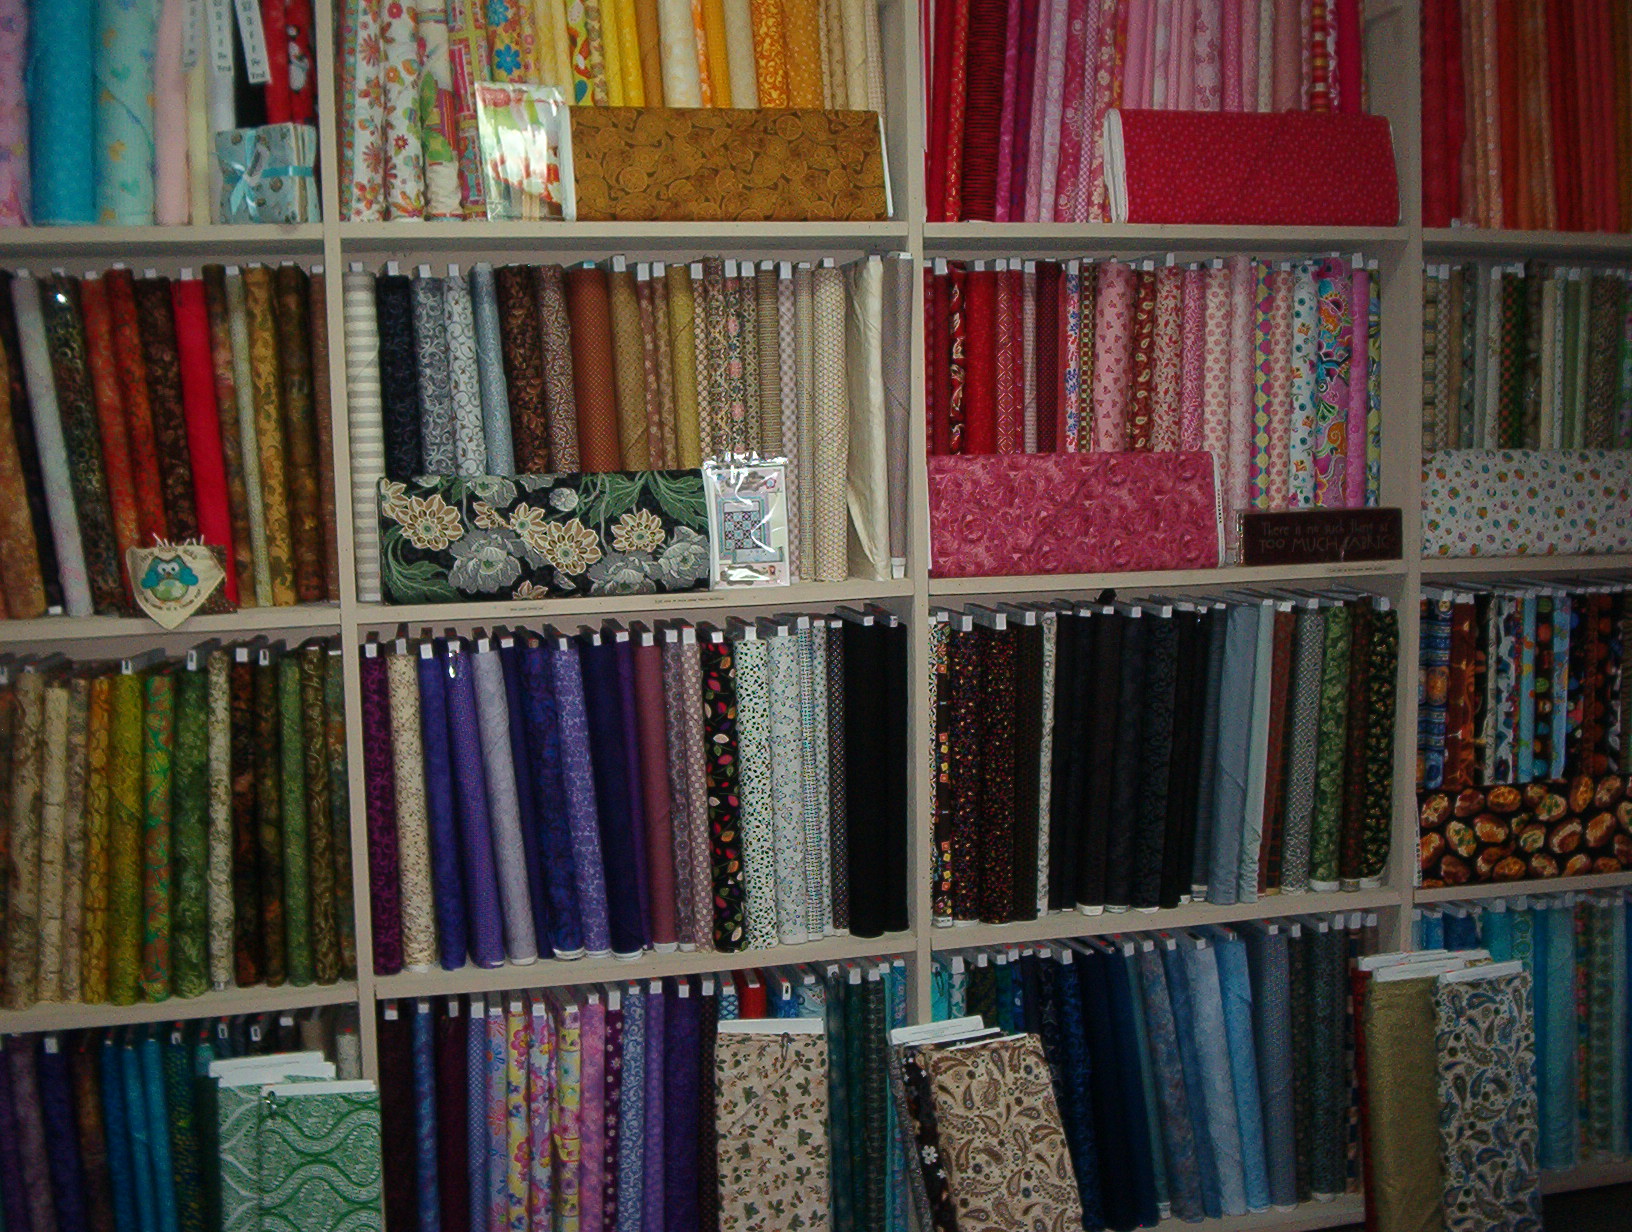 There is no such thing as too much fabric!